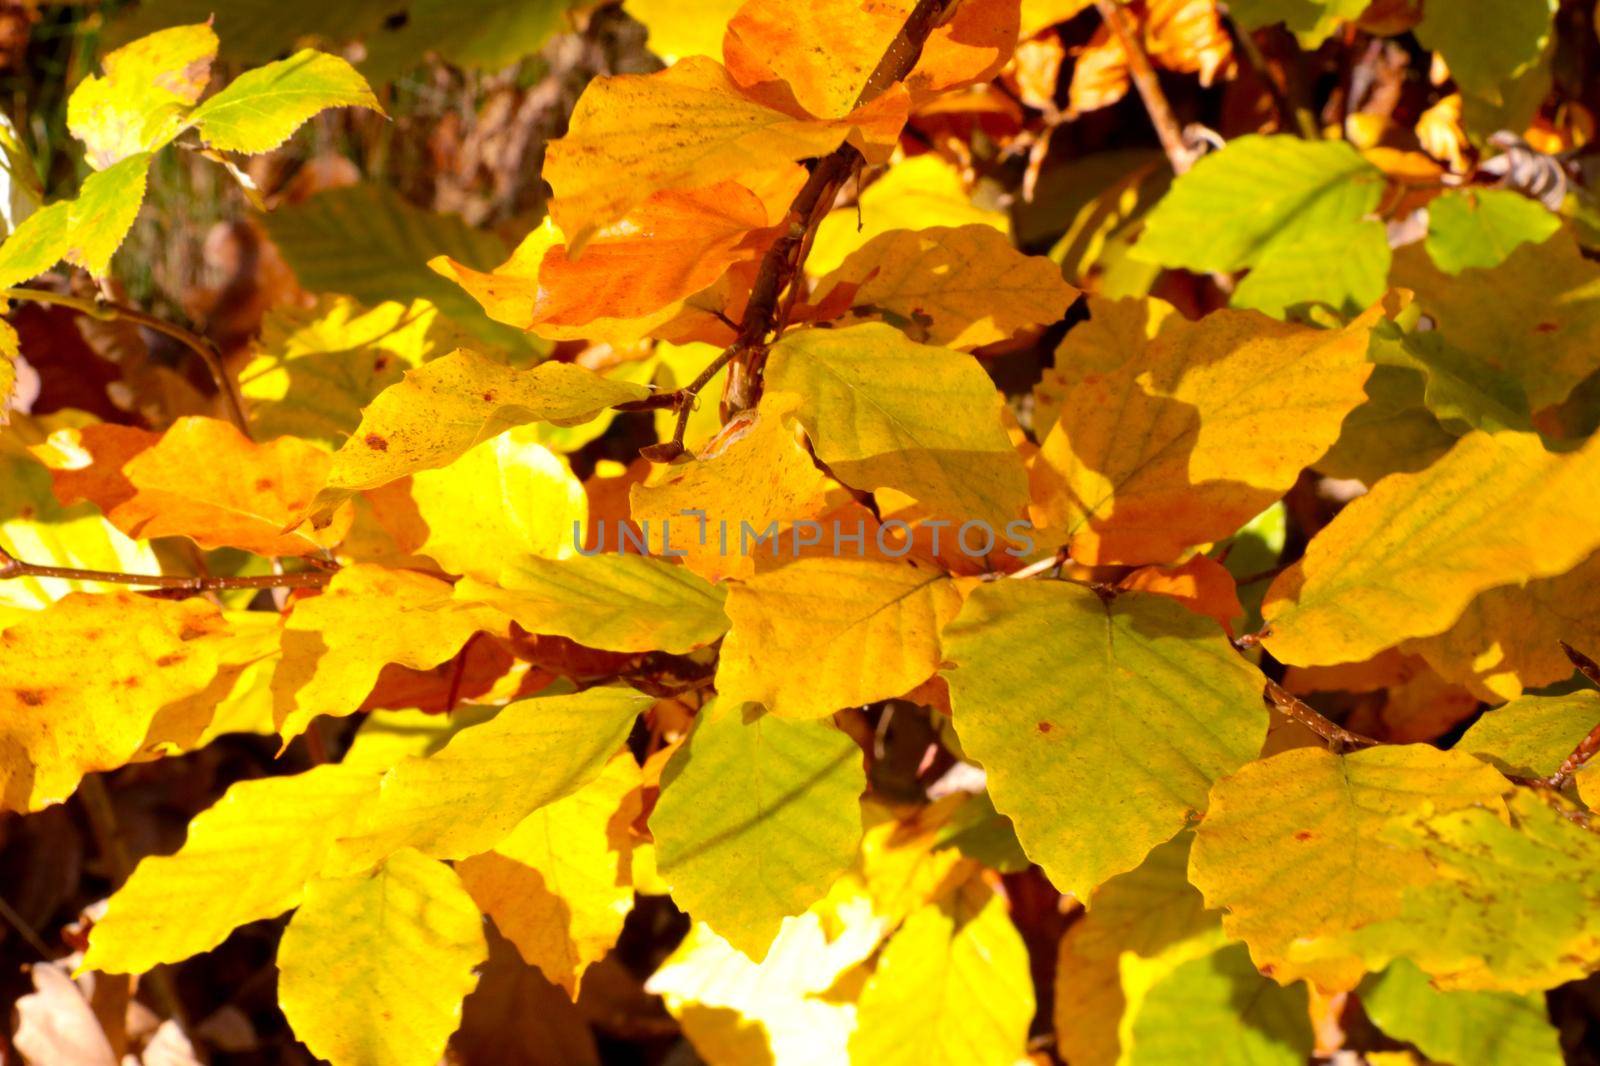 Bright yellow leaves grow on a tree in the forest in autumn